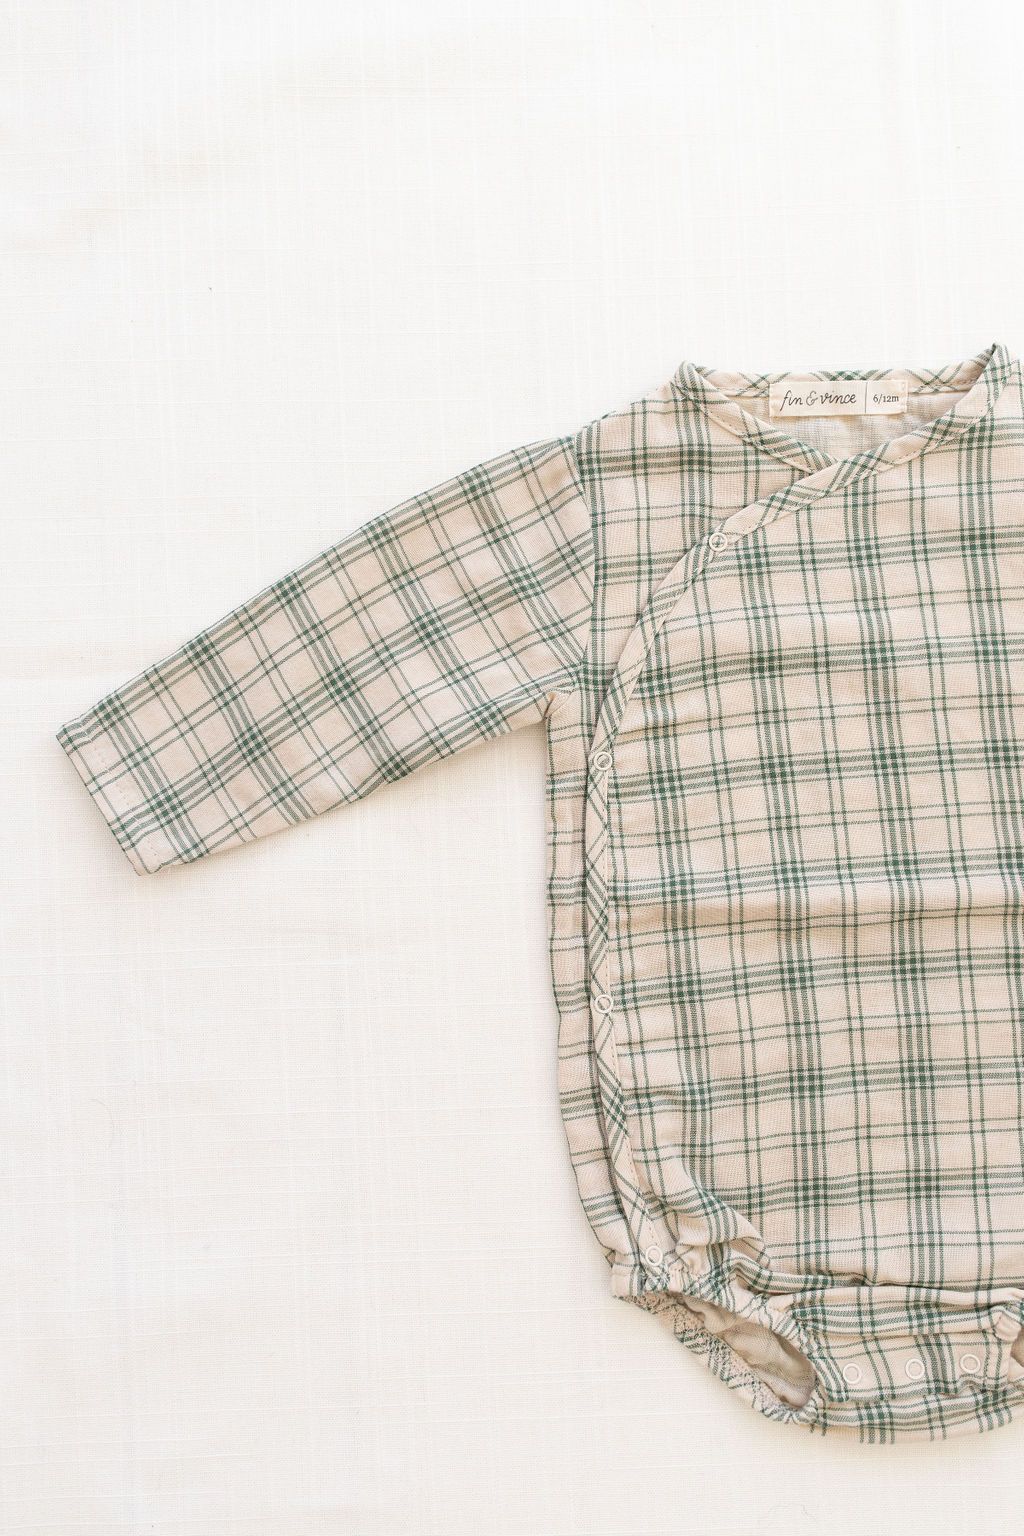 Fin and Vince Wrap Onesie in Ivy French | 30% OFF SALE | Children of the Wild